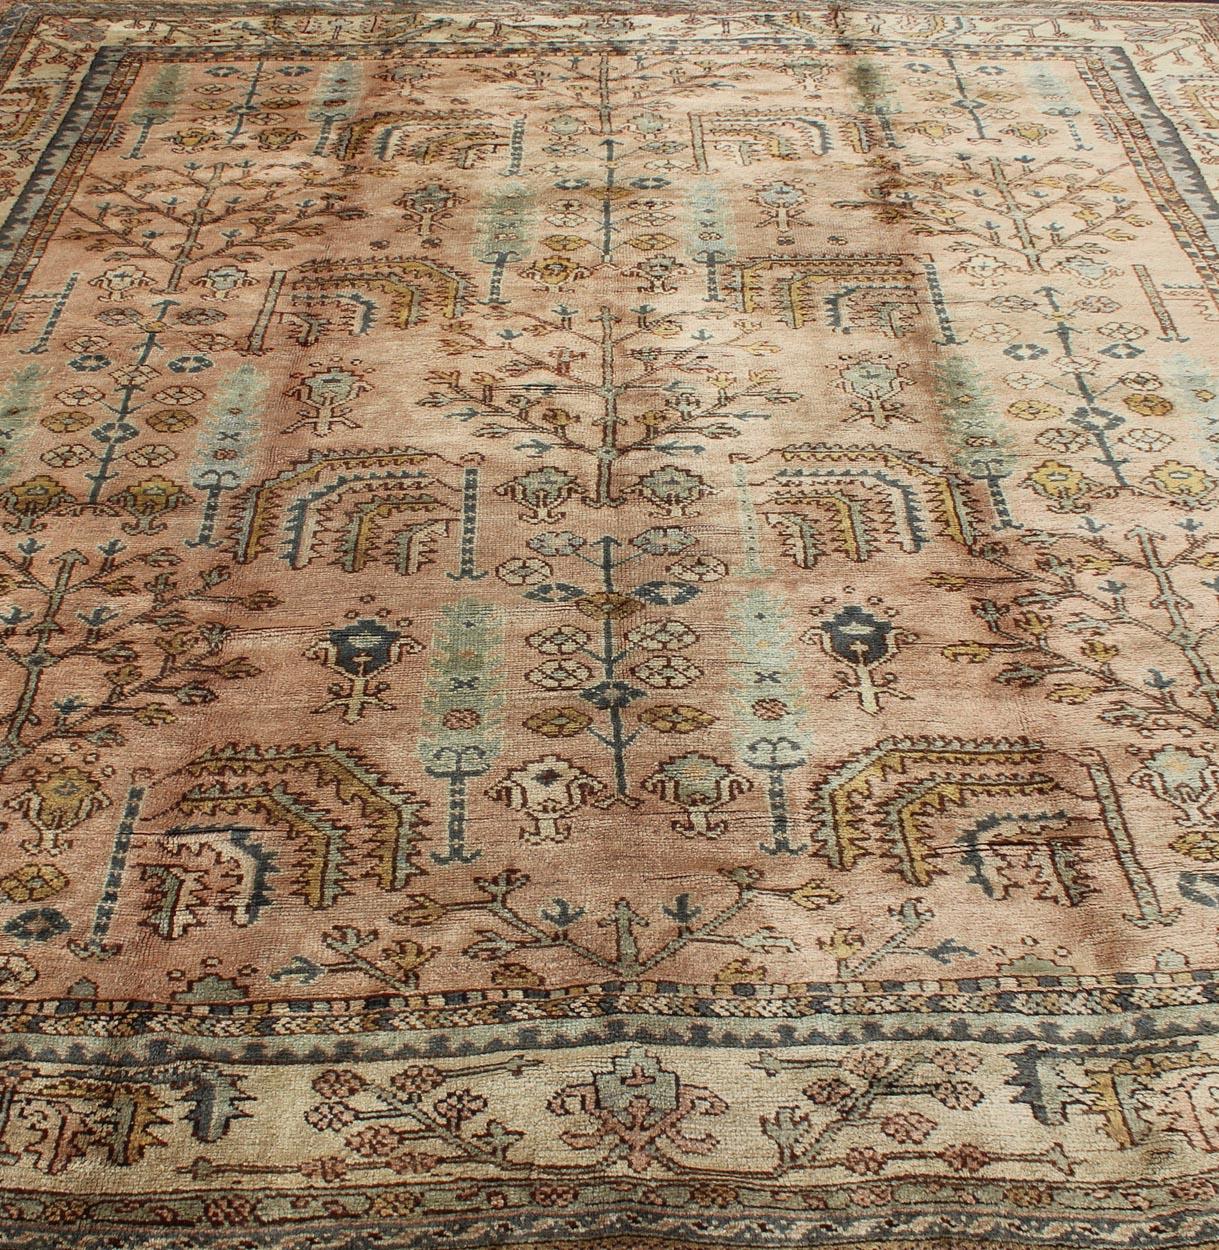 Wool Turkish Oushak Antique Rug with Botanical Design in Salmon, Blue and Brown